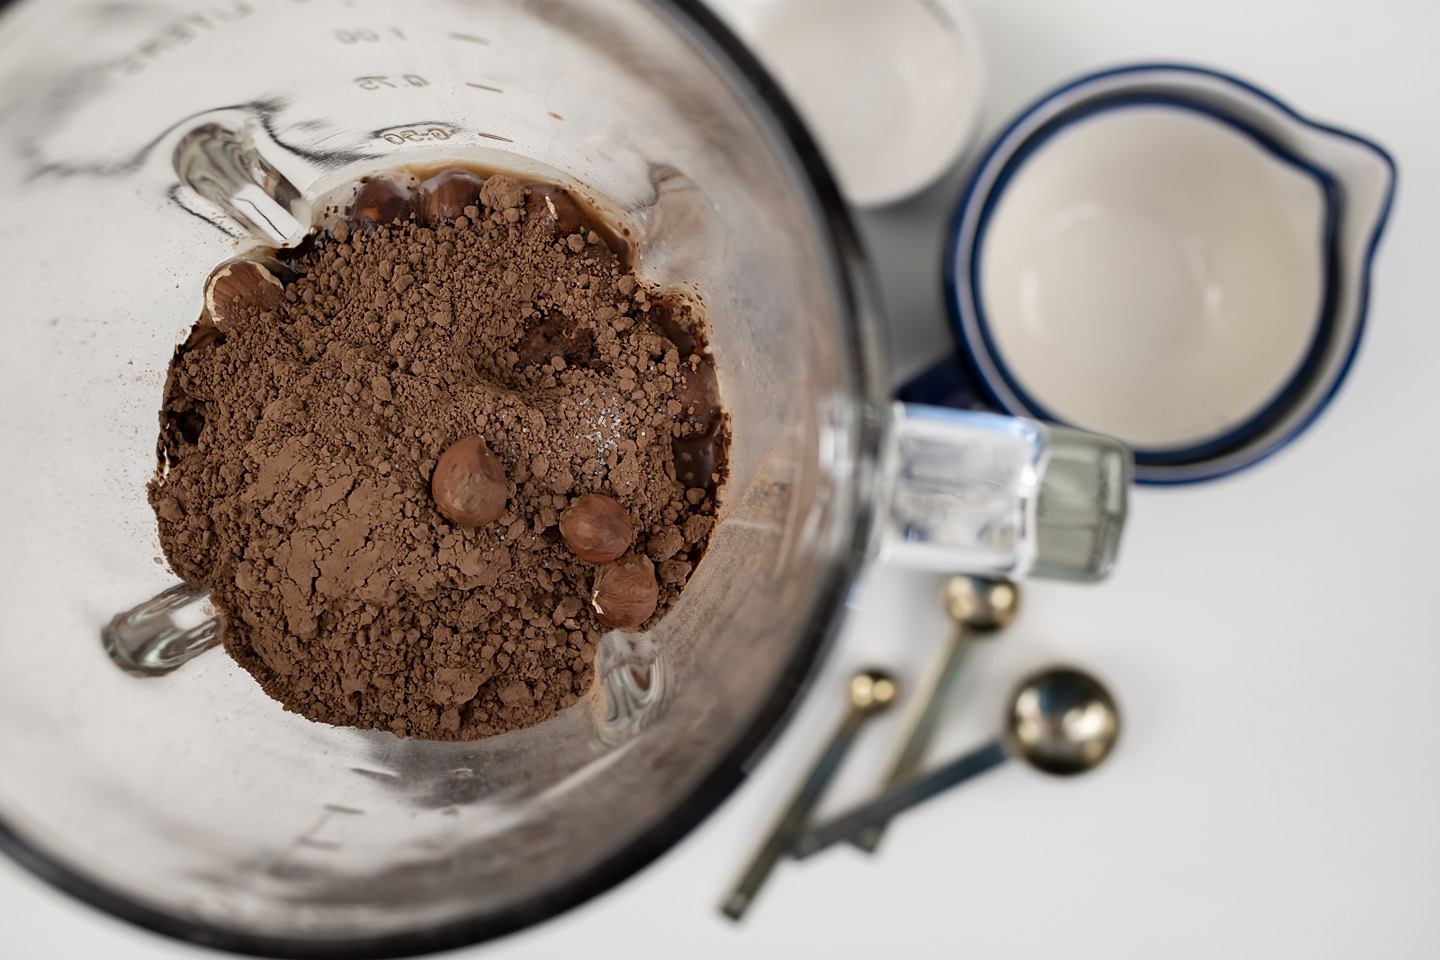 The next time you're craving something chocolatey and decadent, try this healthy homemade Nutella recipe. Made with all simple ingredients and no added sugar, you might just like this as much as the real thing!